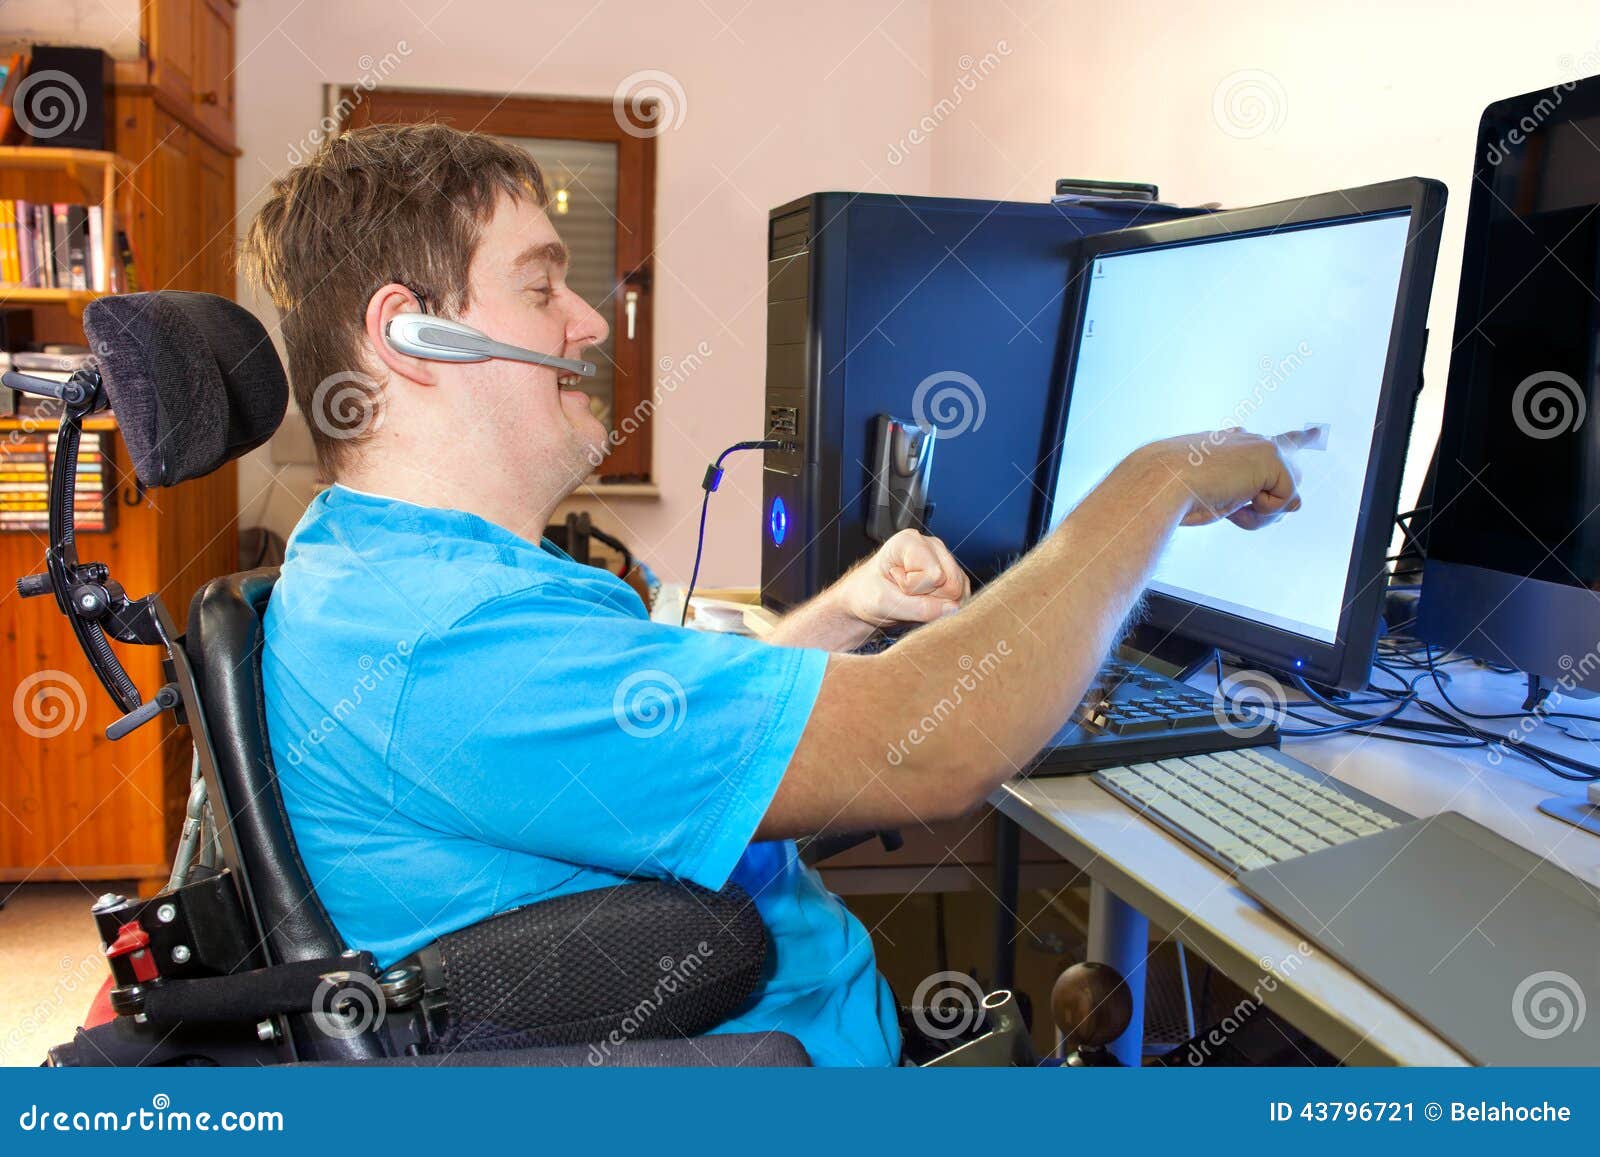 man with infantile cerebral palsy using a computer.